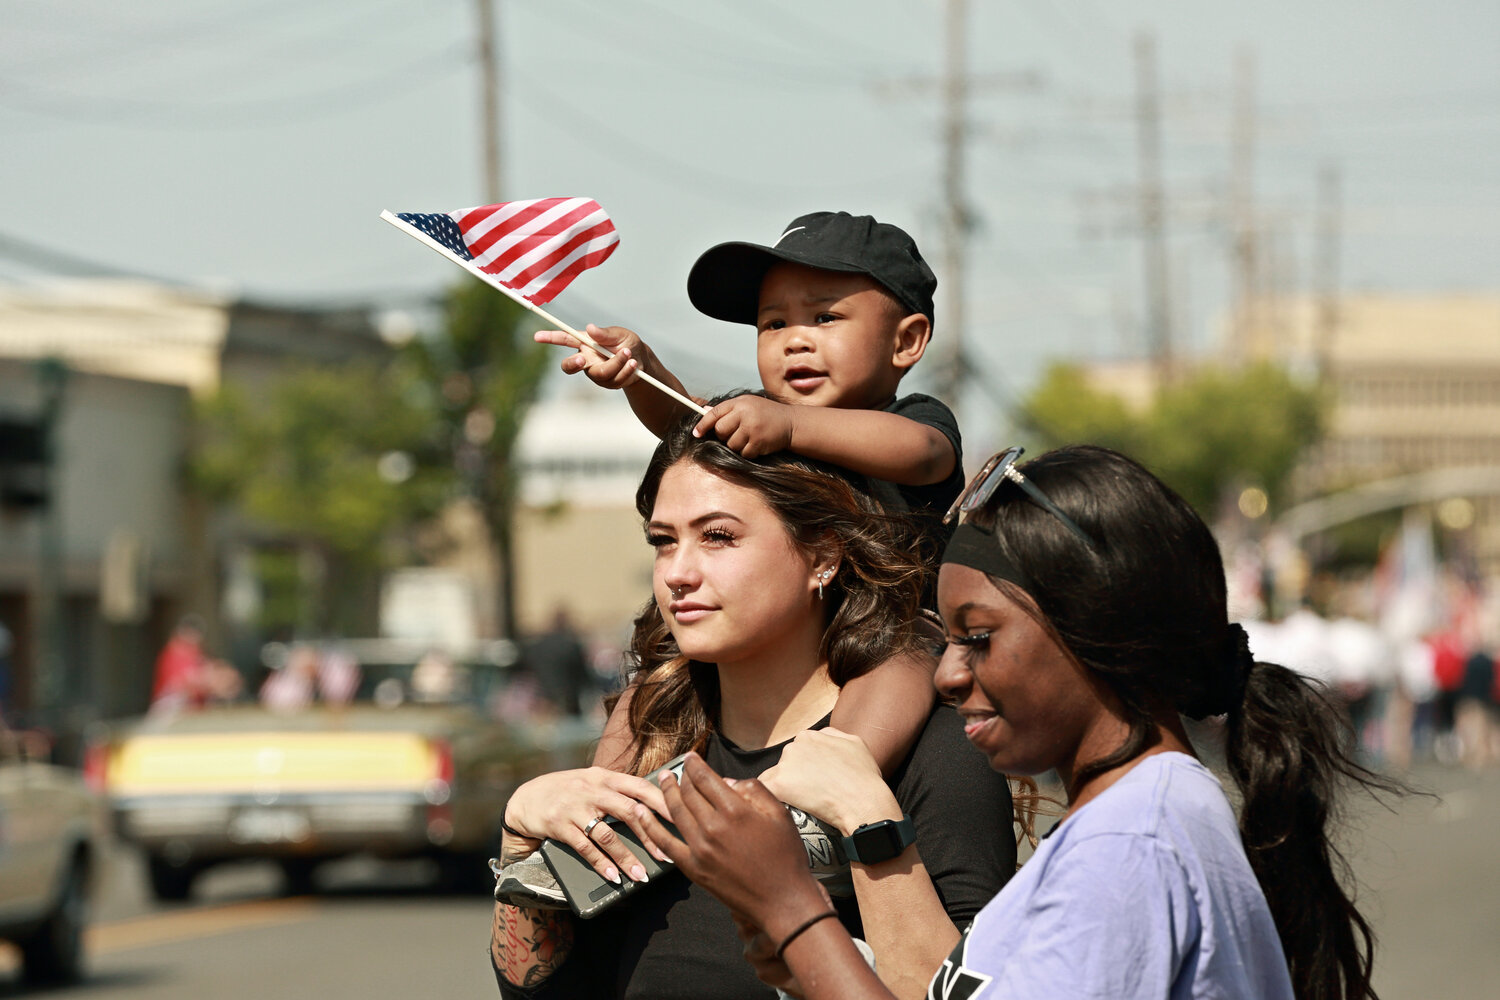 Madison Ander, 1-year-old Grayson Ander, and Shania Durandisse enjoy the parade.